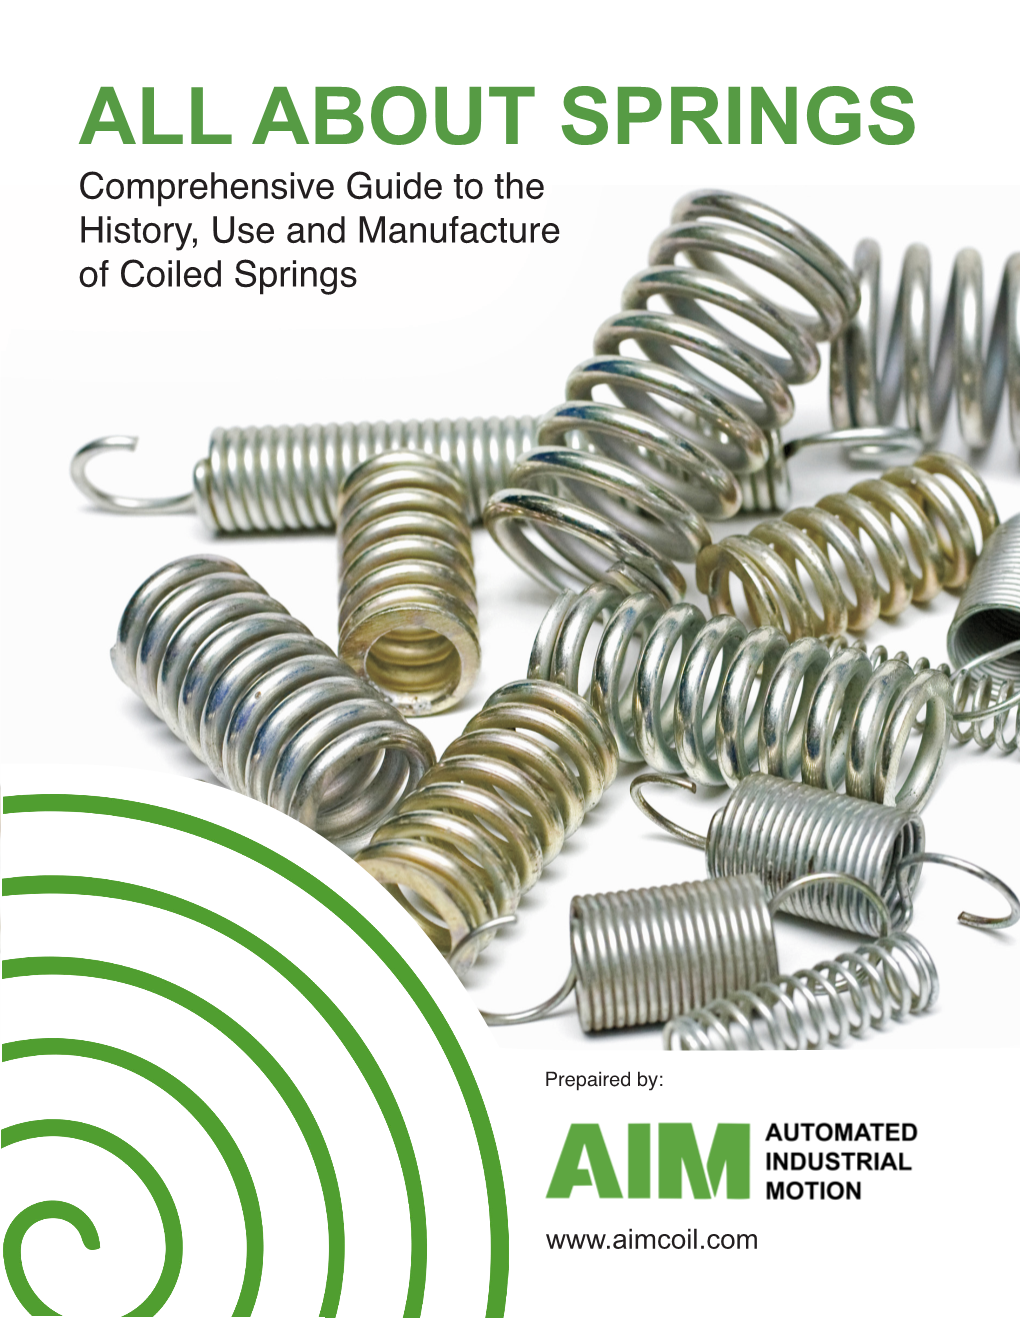 ALL ABOUT SPRINGS Comprehensive Guide to the History, Use and Manufacture of Coiled Springs